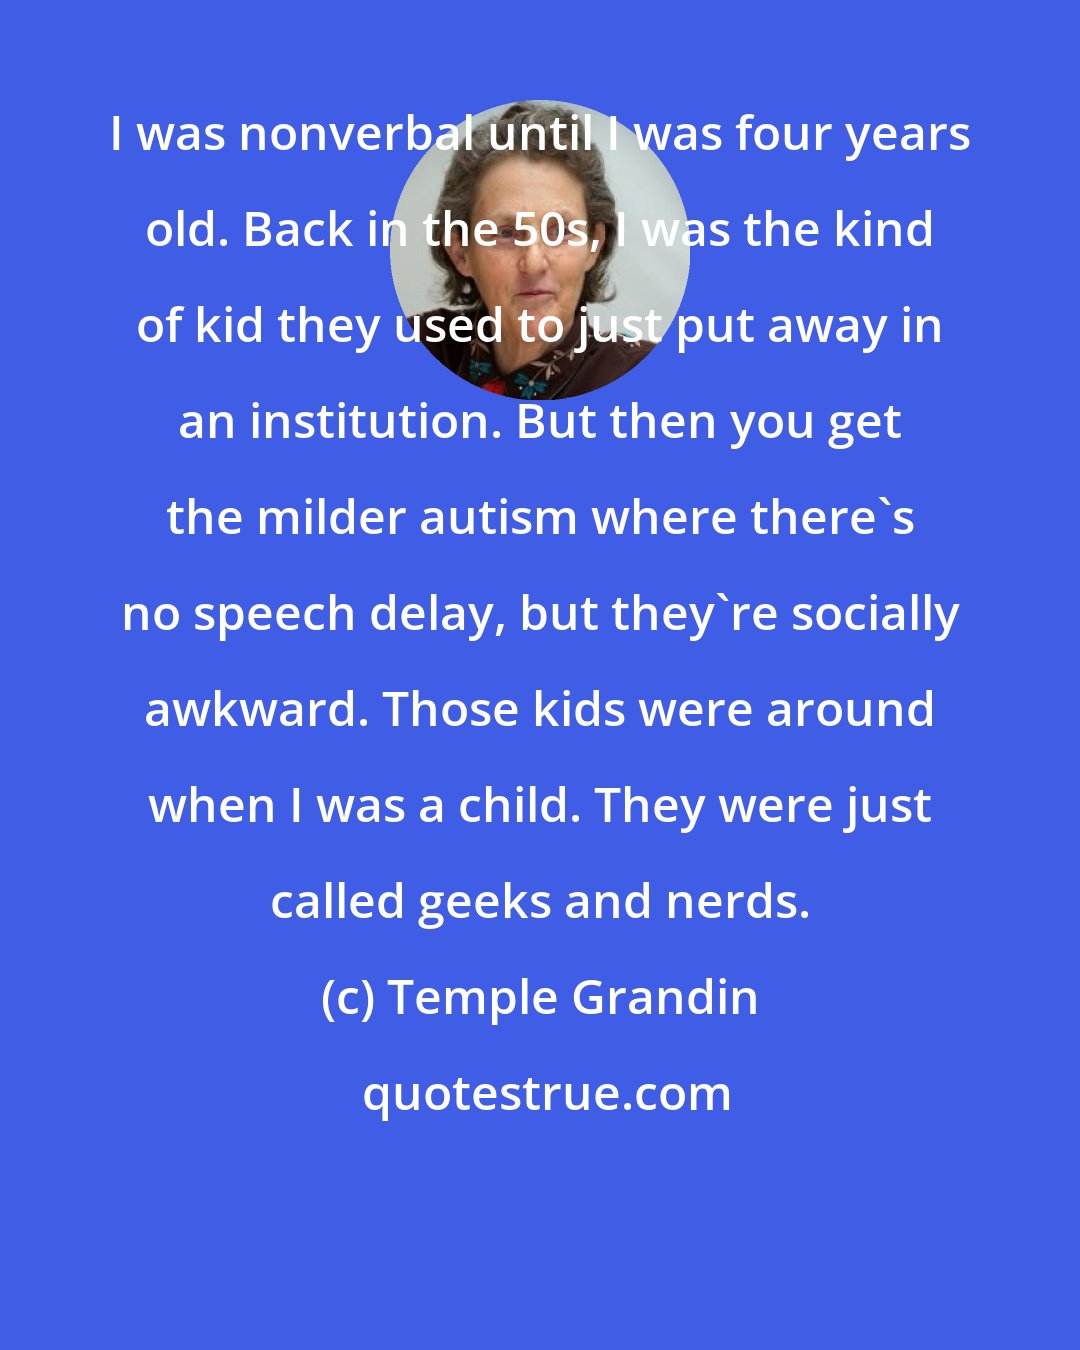 Temple Grandin: I was nonverbal until I was four years old. Back in the 50s, I was the kind of kid they used to just put away in an institution. But then you get the milder autism where there's no speech delay, but they're socially awkward. Those kids were around when I was a child. They were just called geeks and nerds.